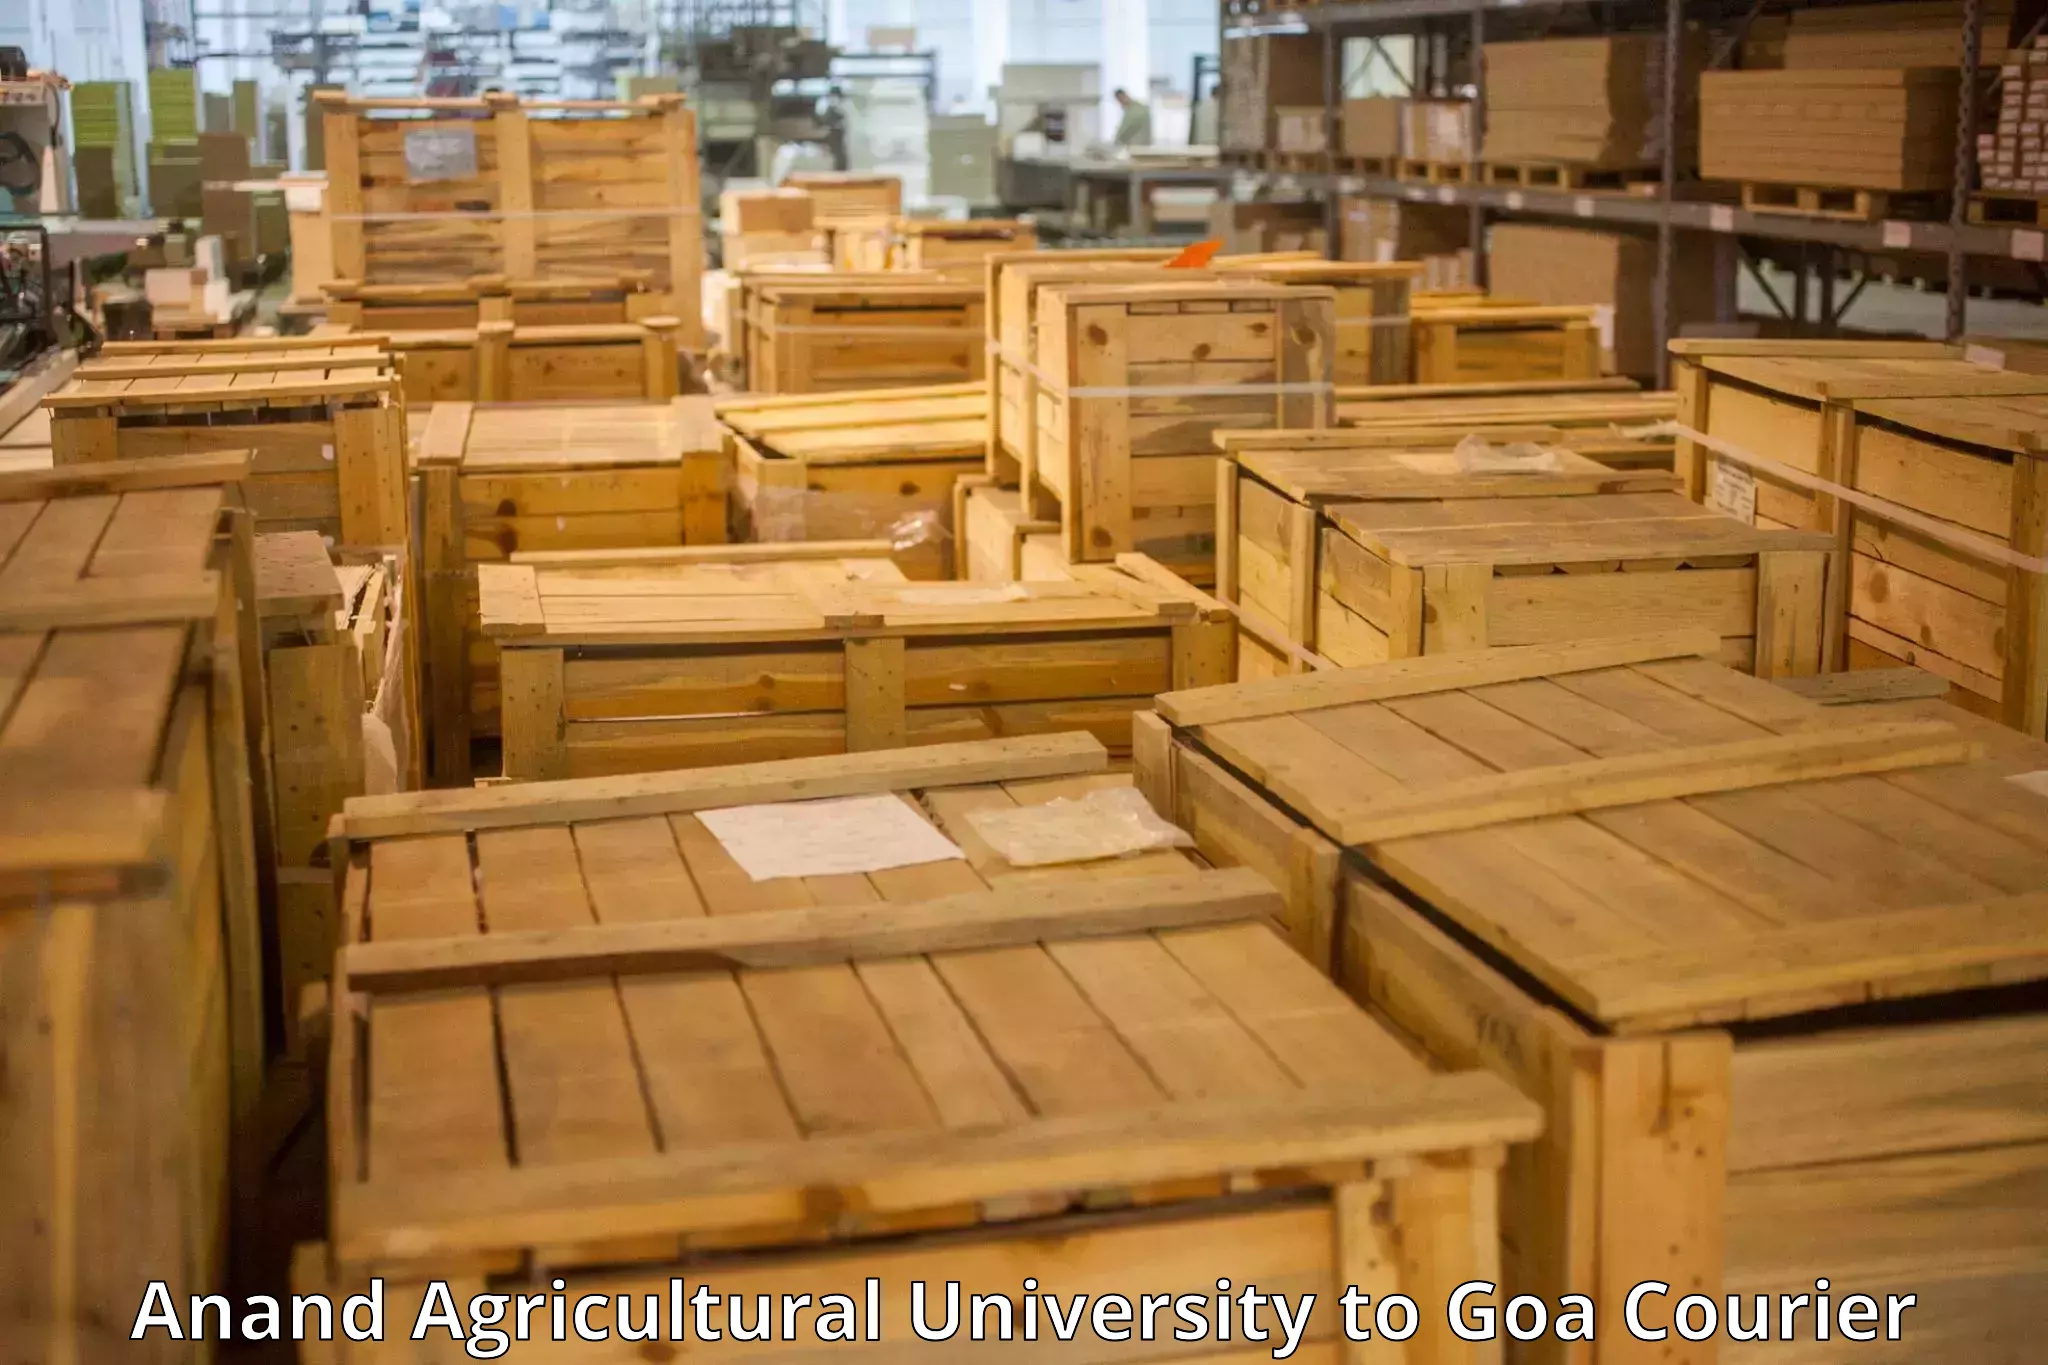 Urgent luggage shipment Anand Agricultural University to Goa